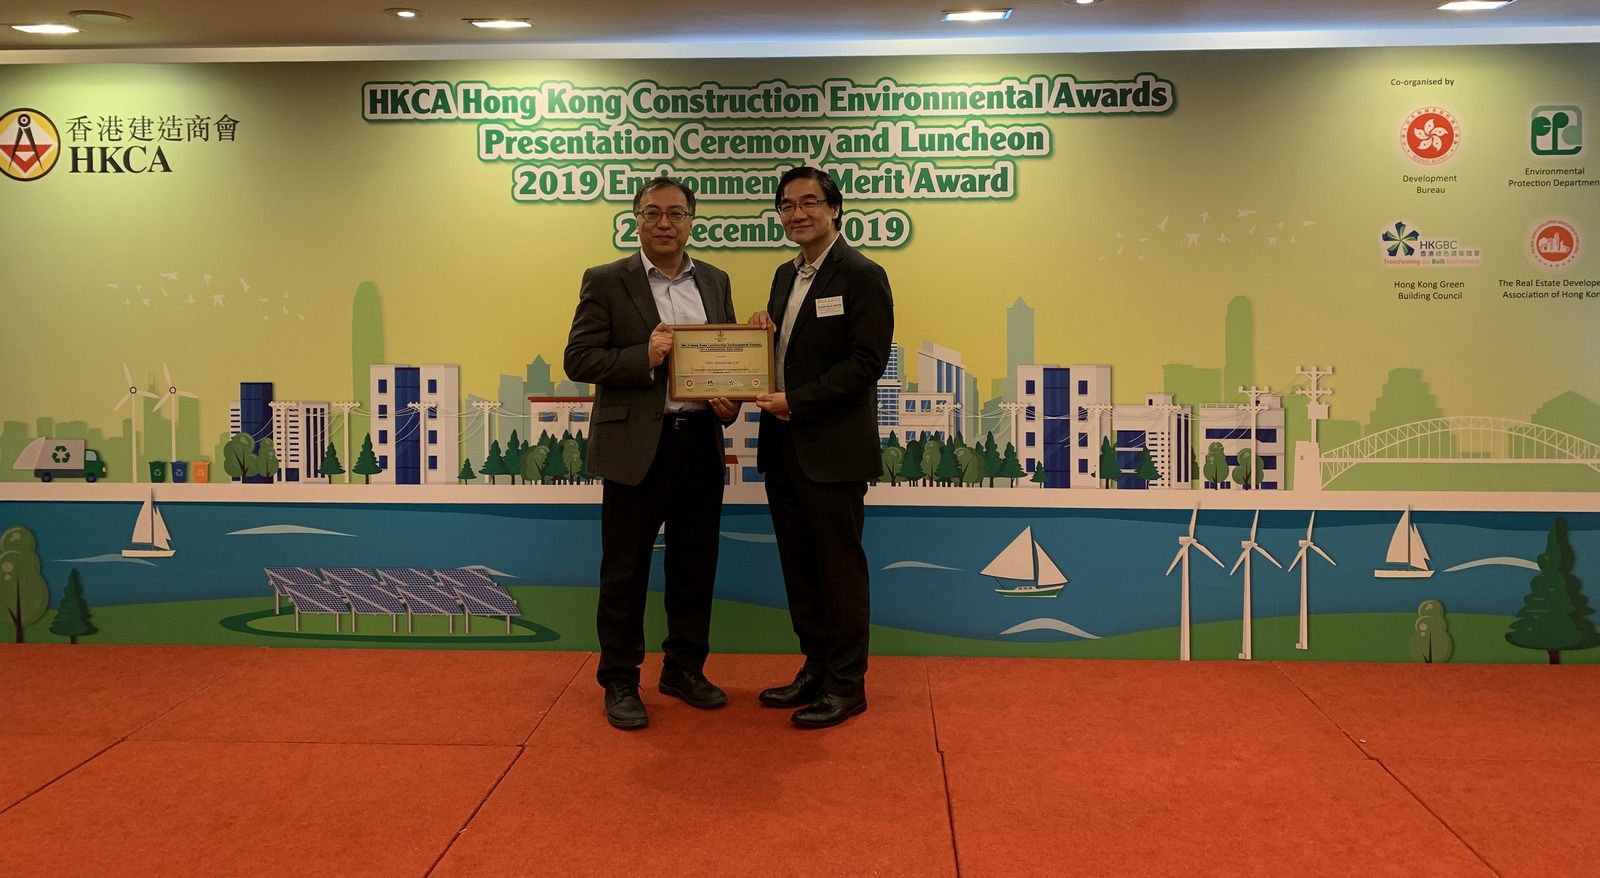 Vibro's environmental efforts has been recognised